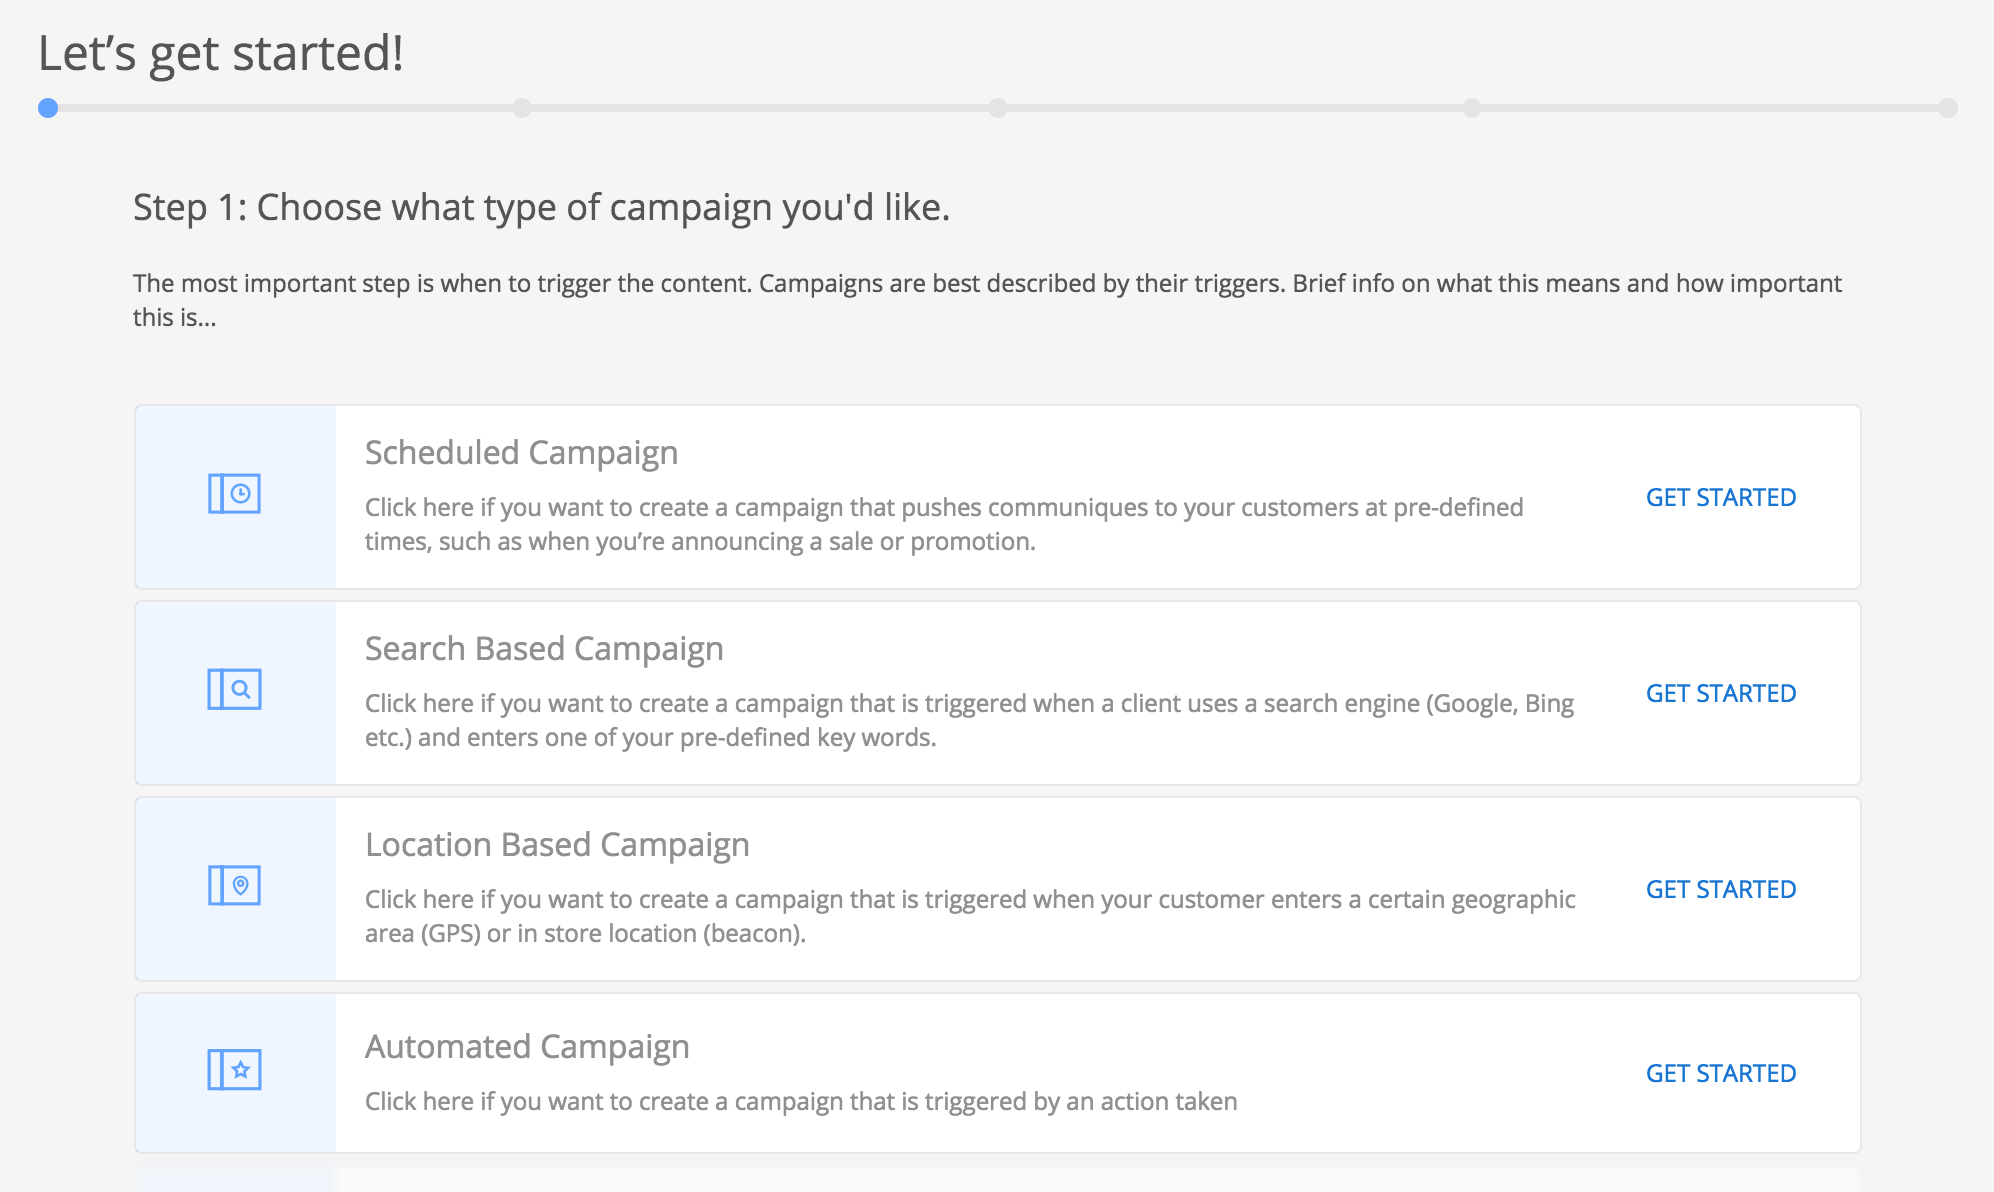 Create Campaign Step 1 (Type)